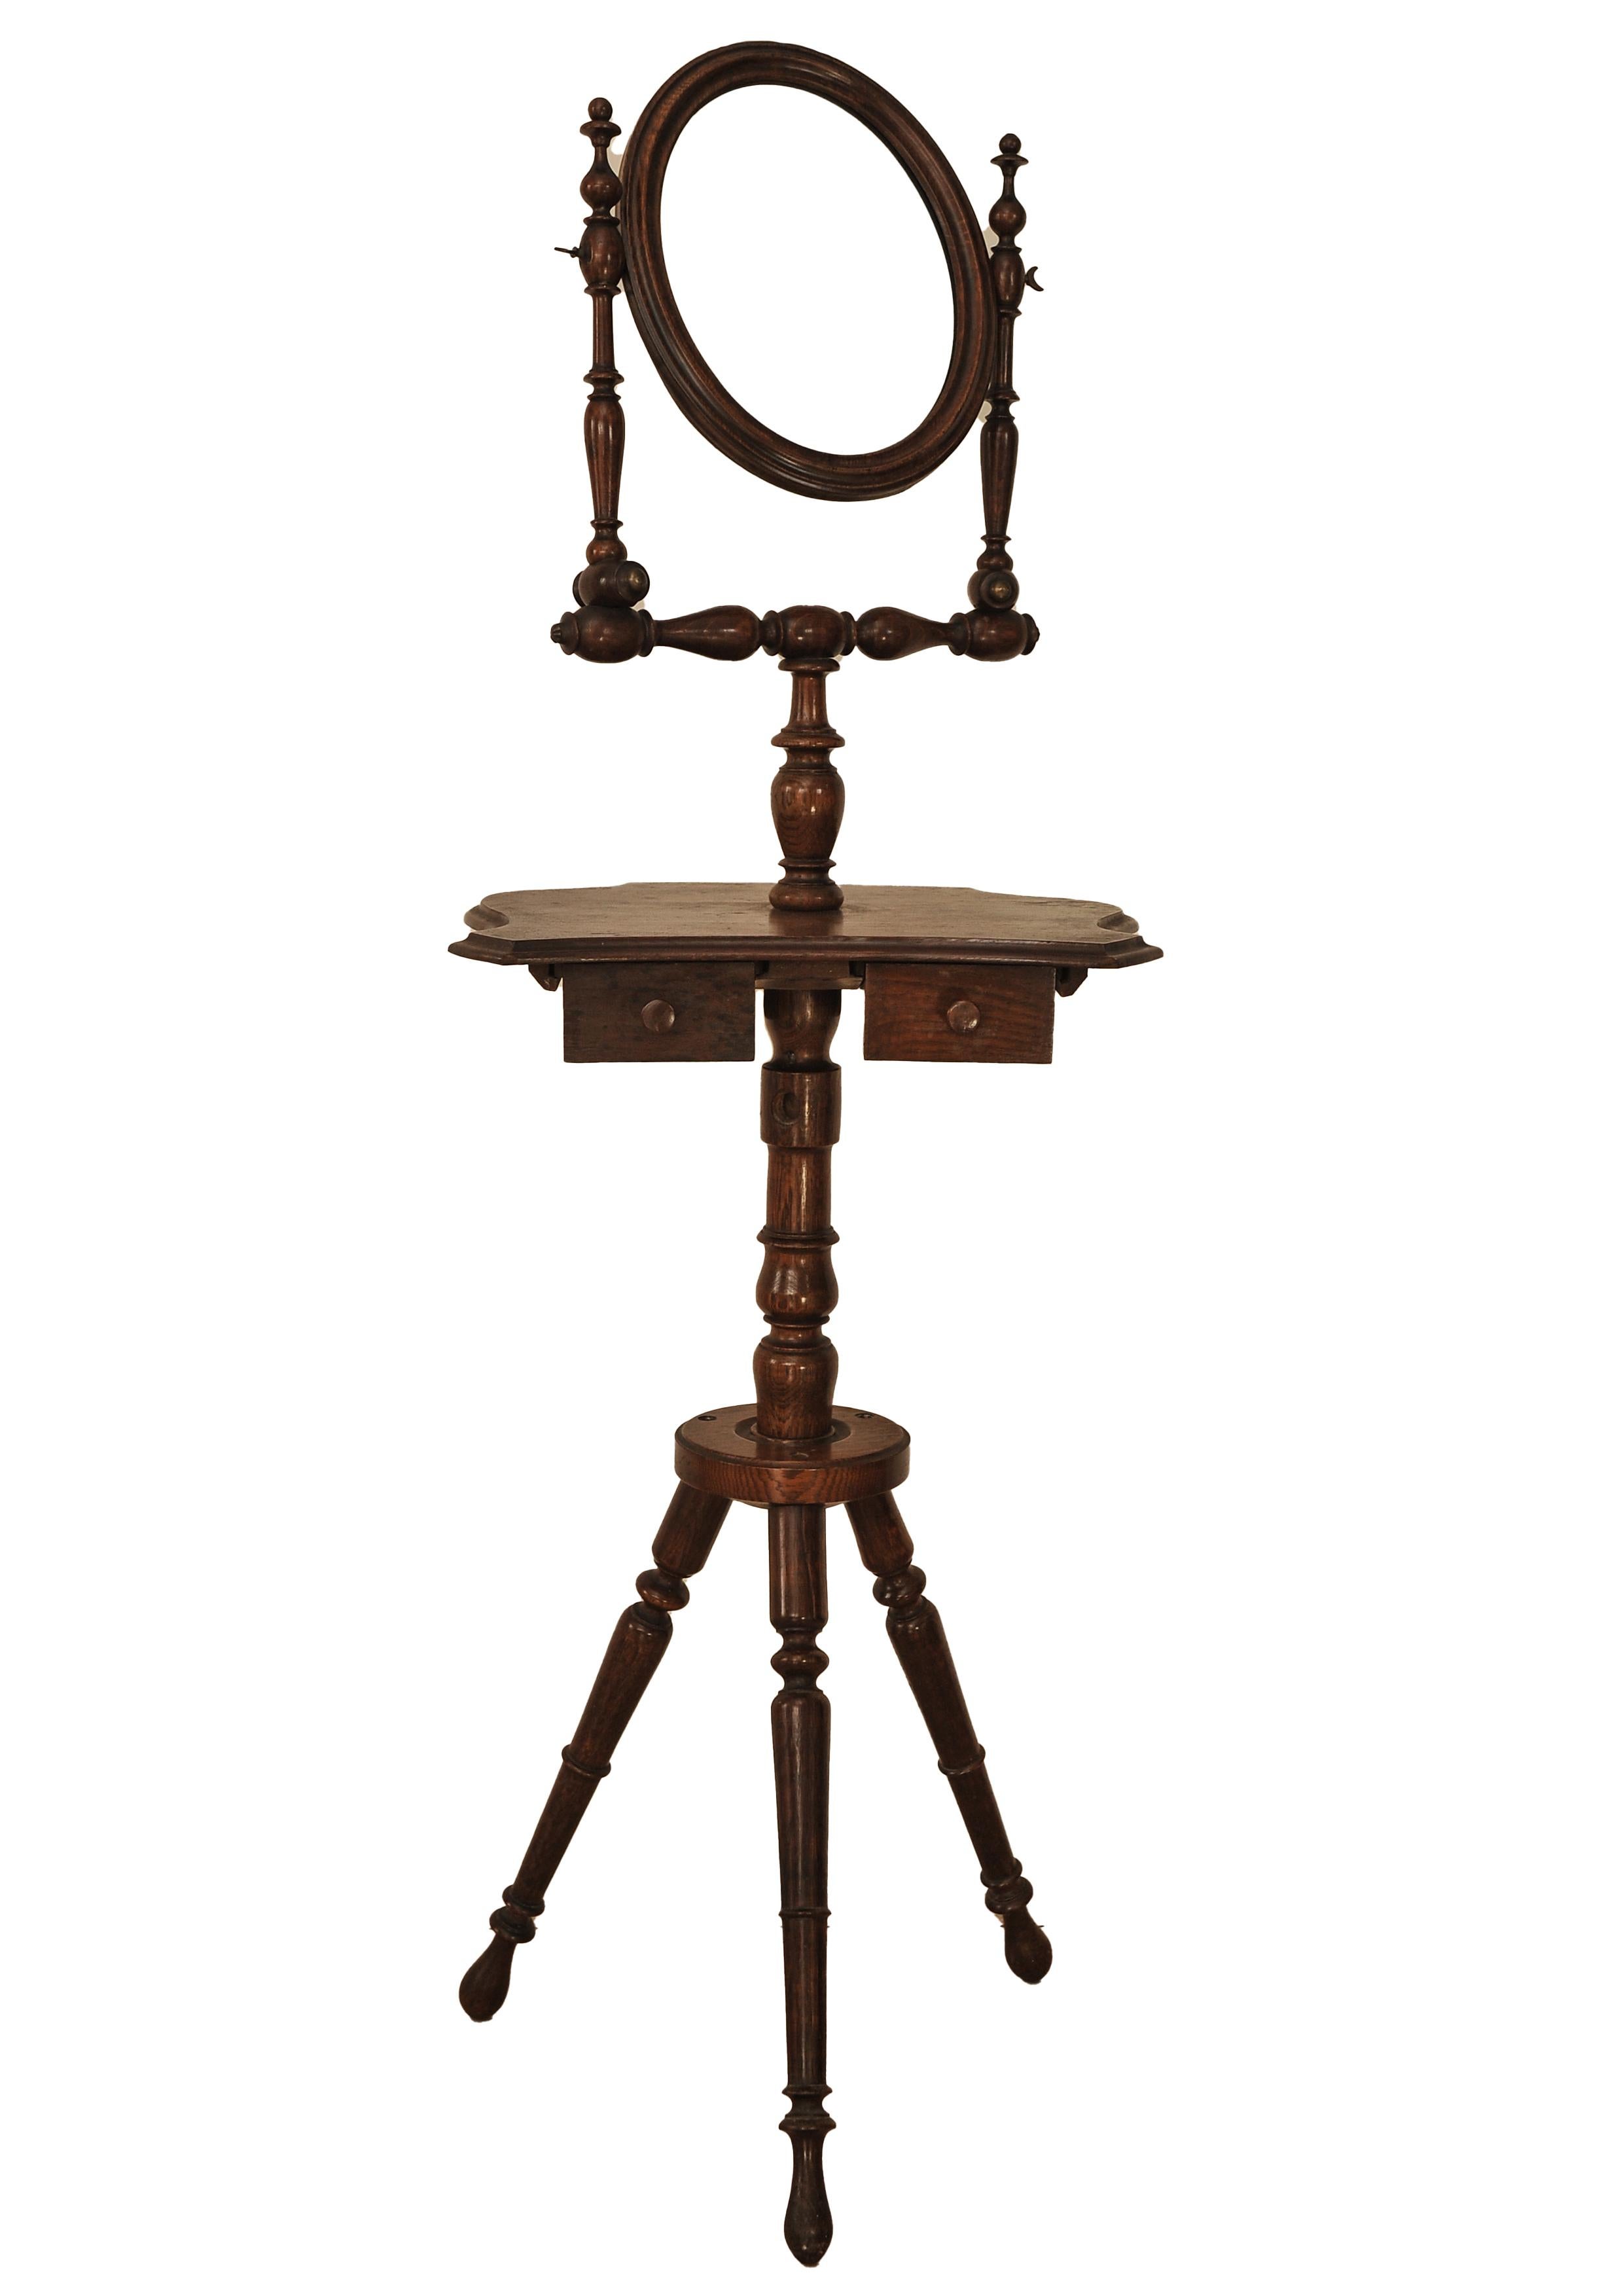 A Handmade Victorian Oak Shaving Stand, With A Pivotable Oval Mirror On Turned Supports Above An Inverted Shaped Middle Section With Two Frieze Drawers, Raised On A Turned Stem With Tripod Turned Legs.

An extremely well executed item, with brass